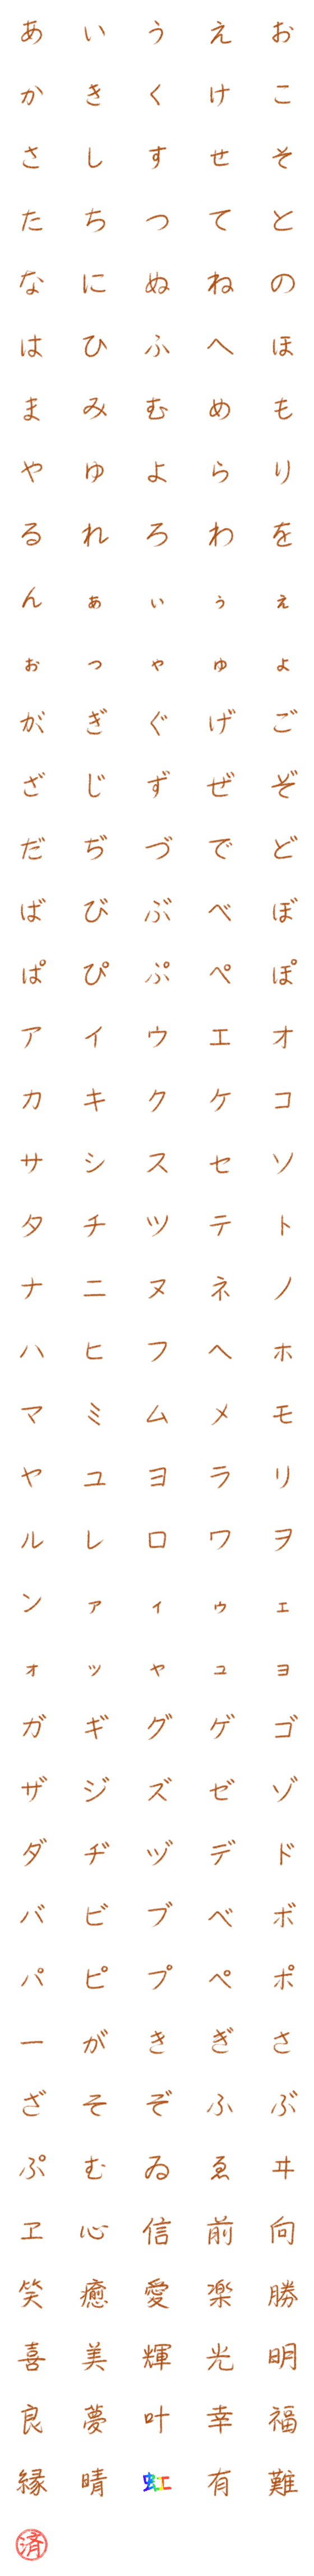 [LINE絵文字]まさとの手書き文字 (五十音/50音/仮名)の画像一覧